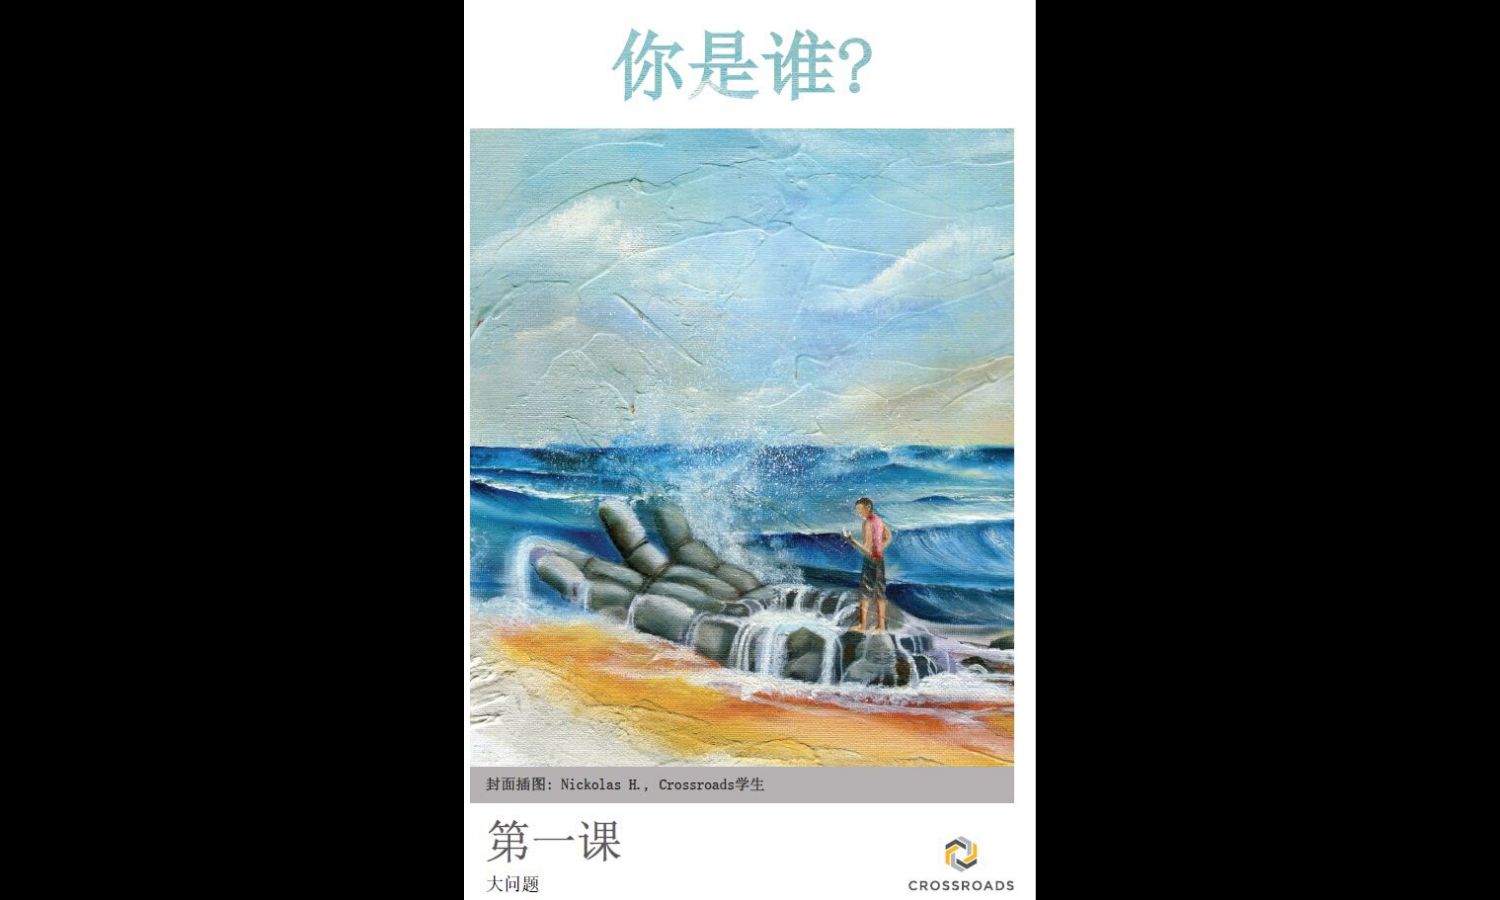 Newest Crossroads Bible Study Now Available in Mandarin